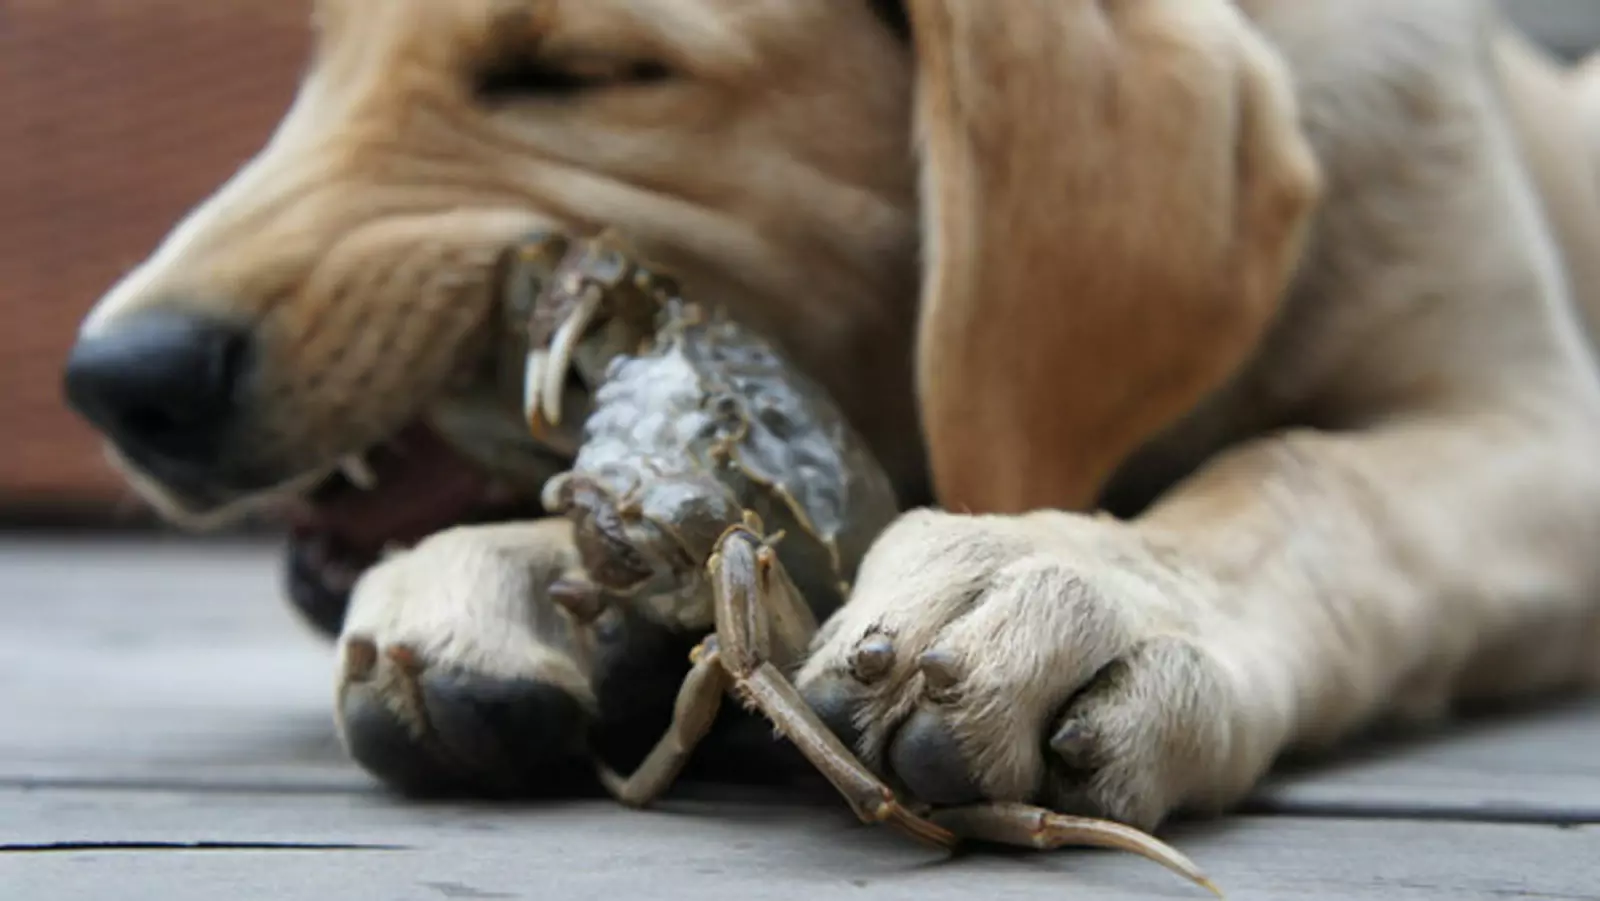 Can dogs eat crab?What is the danger of dogs eating crabs?